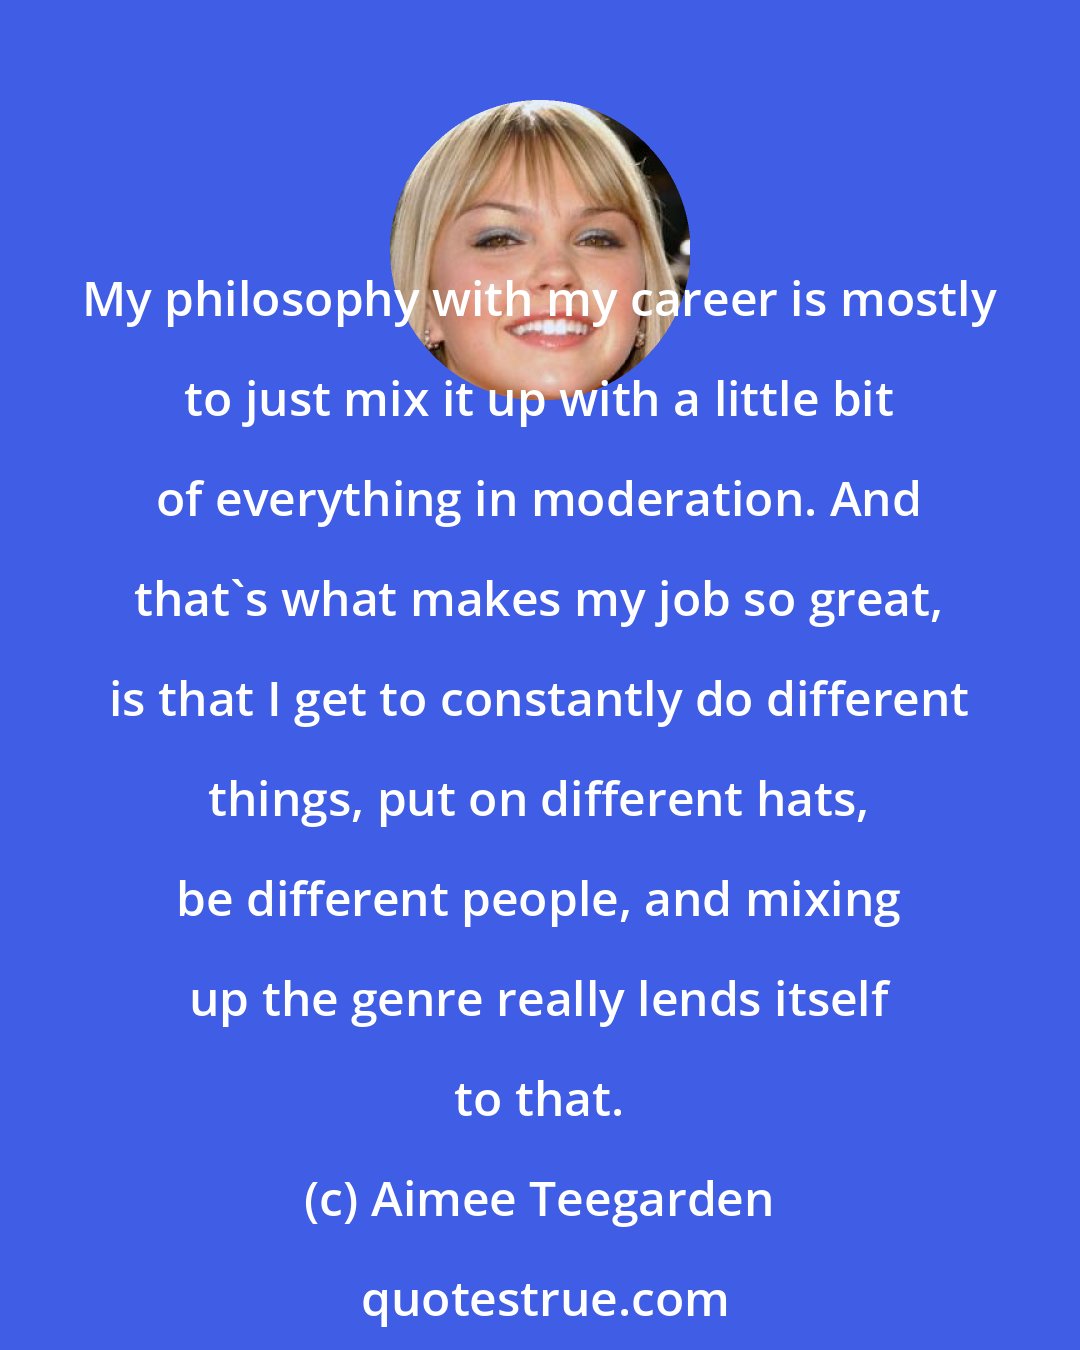 Aimee Teegarden: My philosophy with my career is mostly to just mix it up with a little bit of everything in moderation. And that's what makes my job so great, is that I get to constantly do different things, put on different hats, be different people, and mixing up the genre really lends itself to that.